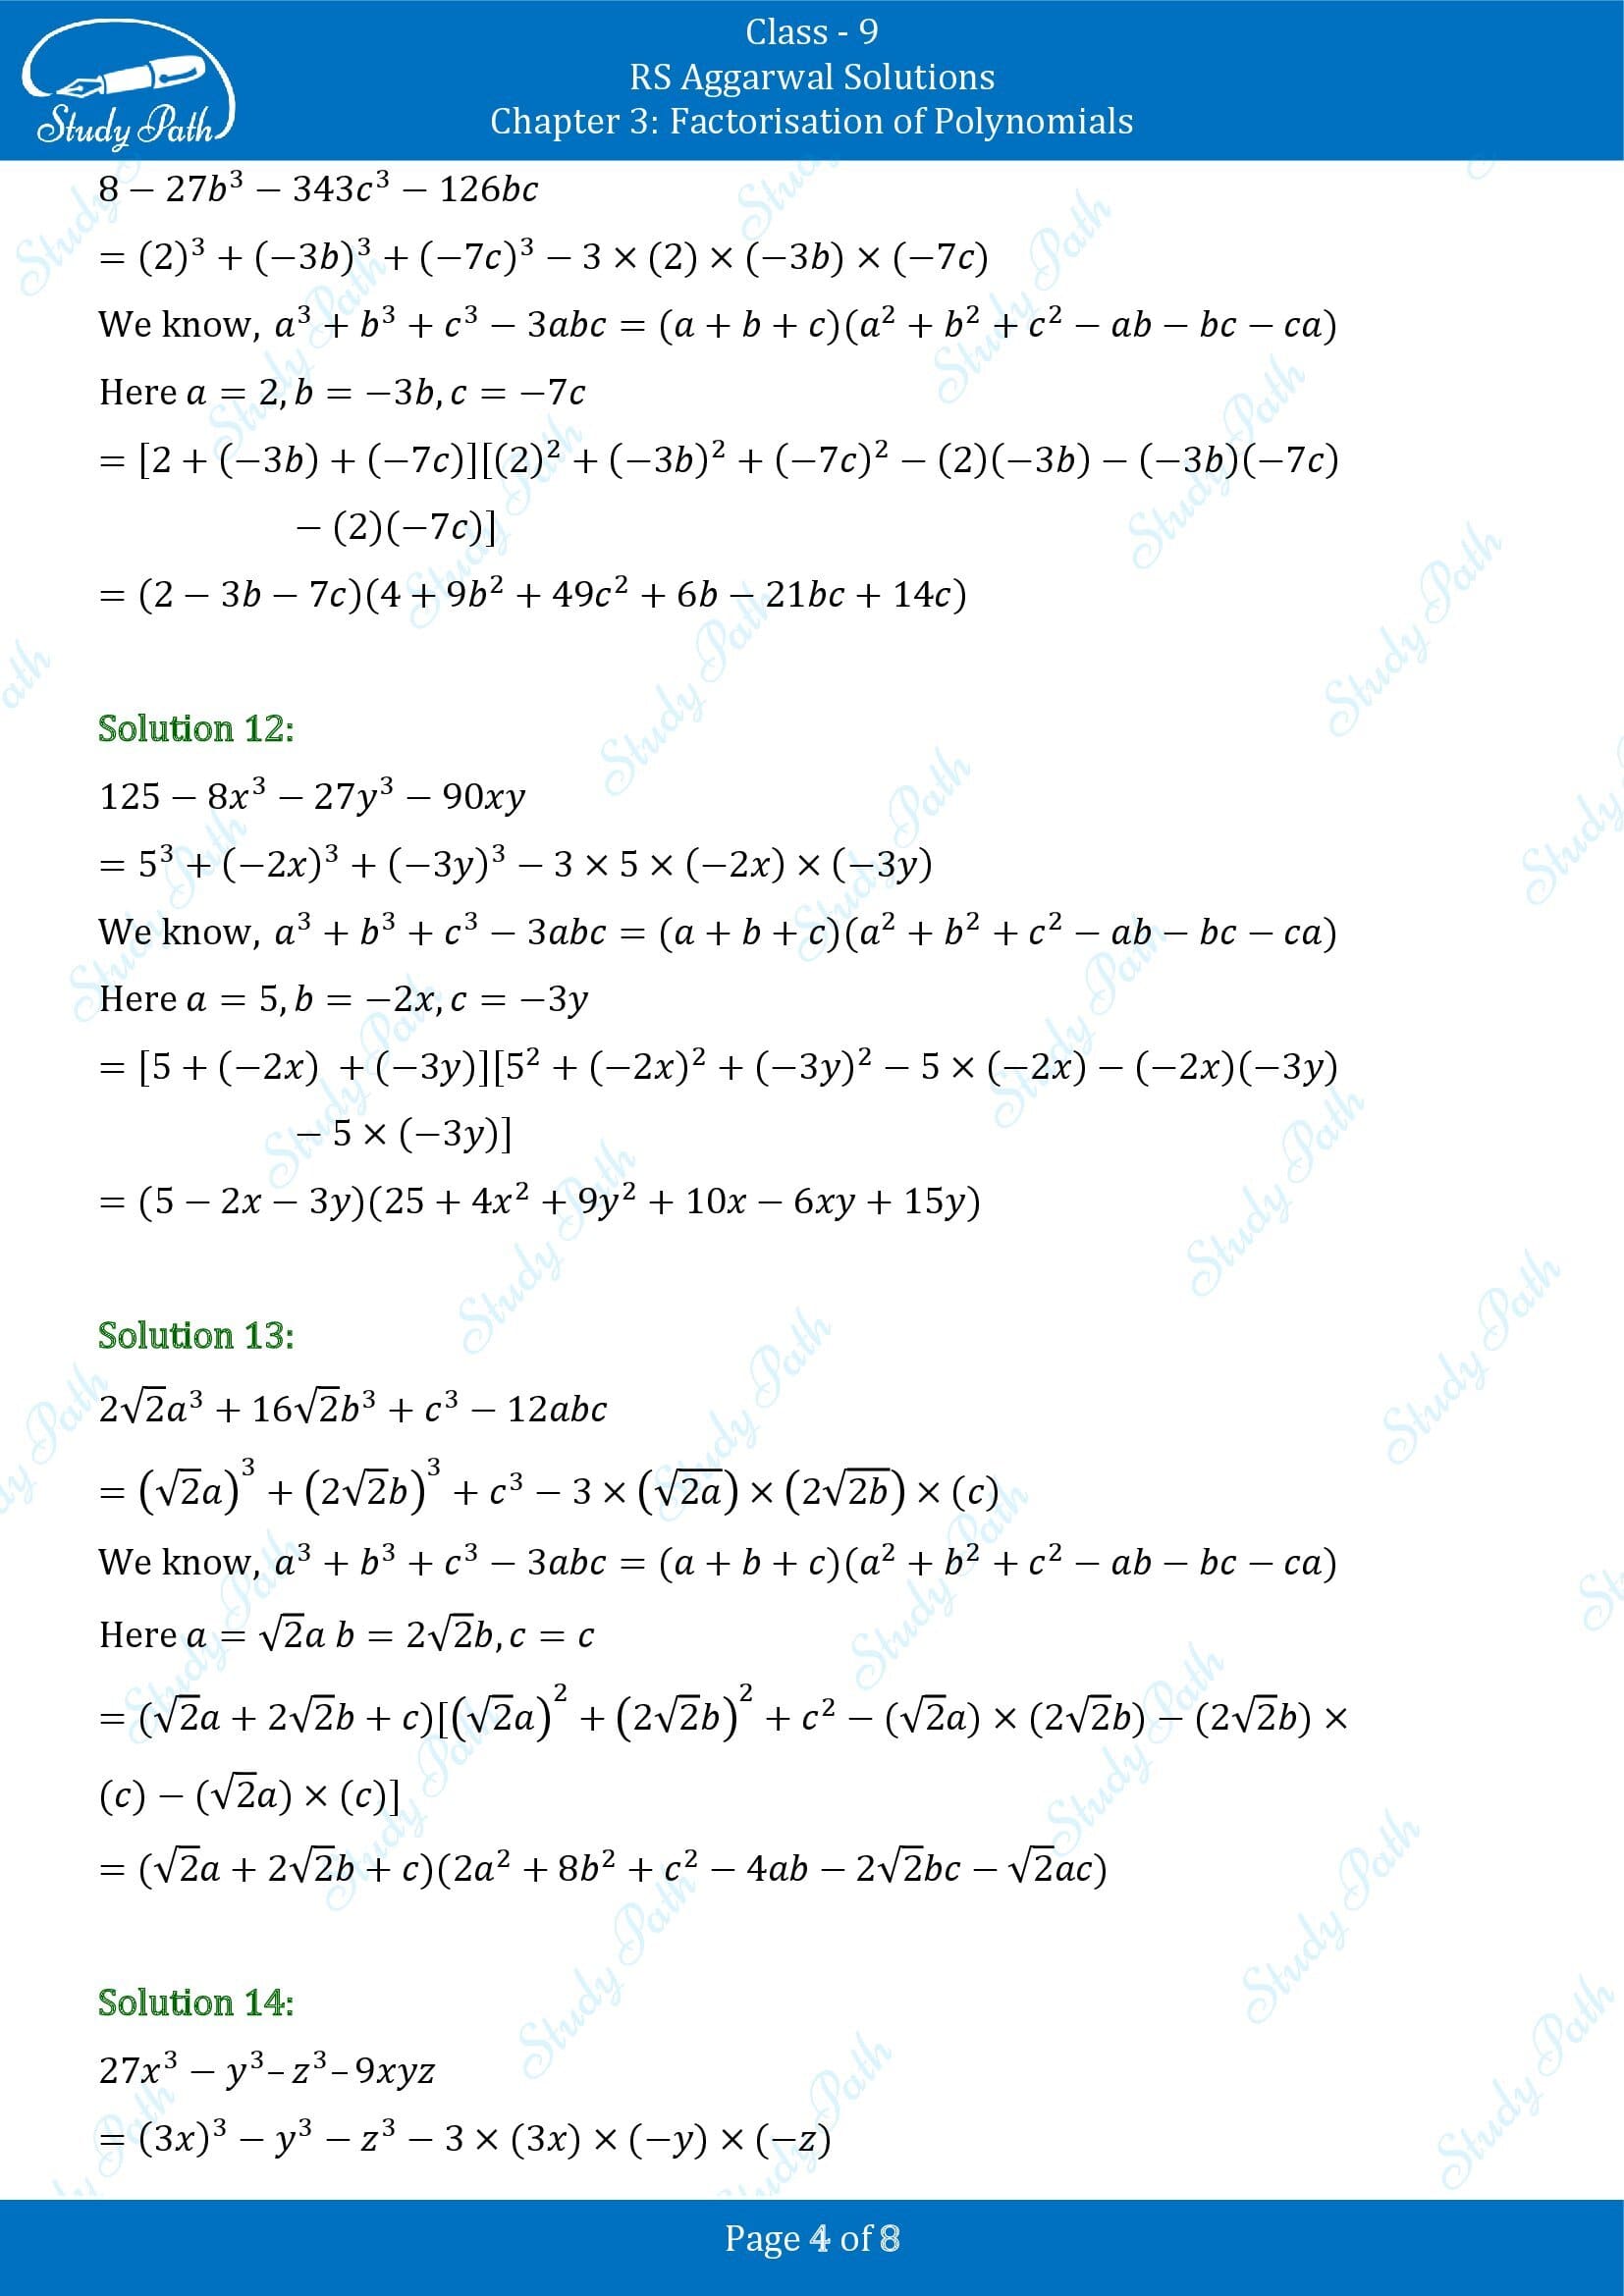 RS Aggarwal Solutions Class 9 Chapter 3 Factorisation of Polynomials Exercise 3G 0004